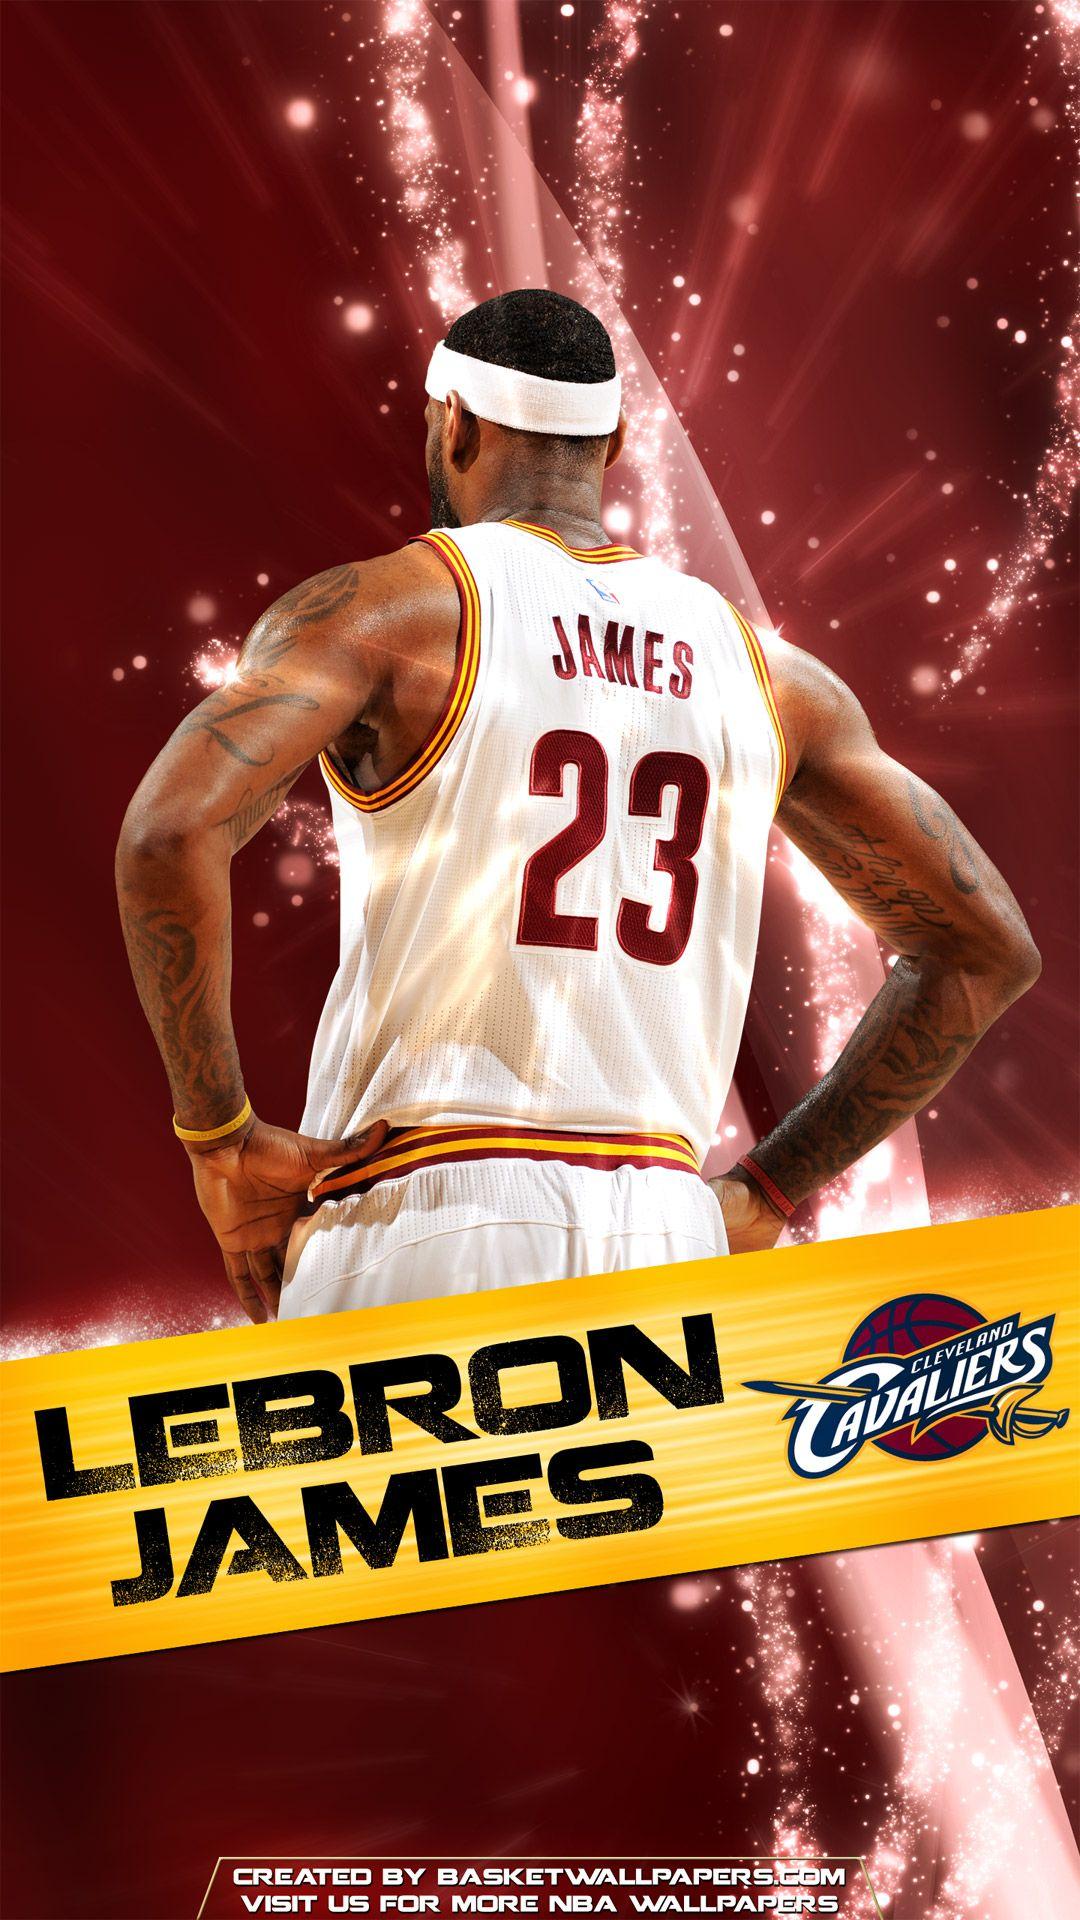 Cleveland Cavaliers Wallpaper for iPhone iPhone 7 plus, iPhone